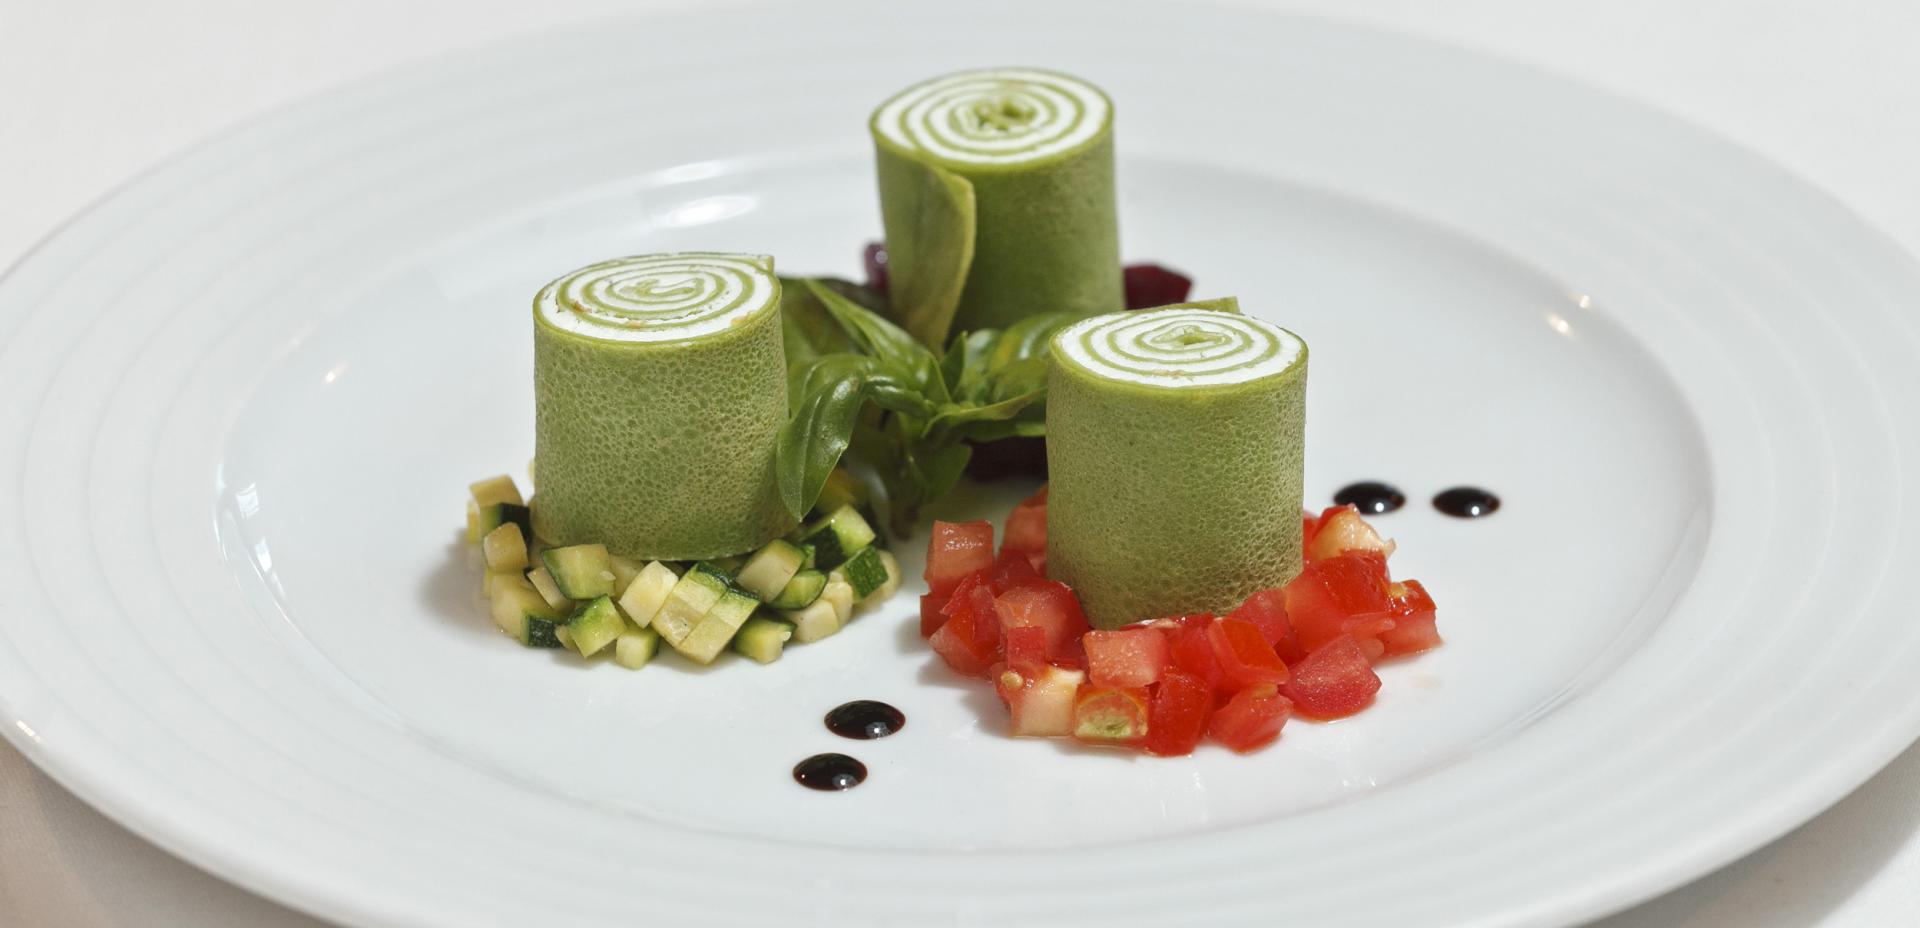 Parsley crêpe rolls filled with crème fraiche served on a ragout of three kinds of vegetables